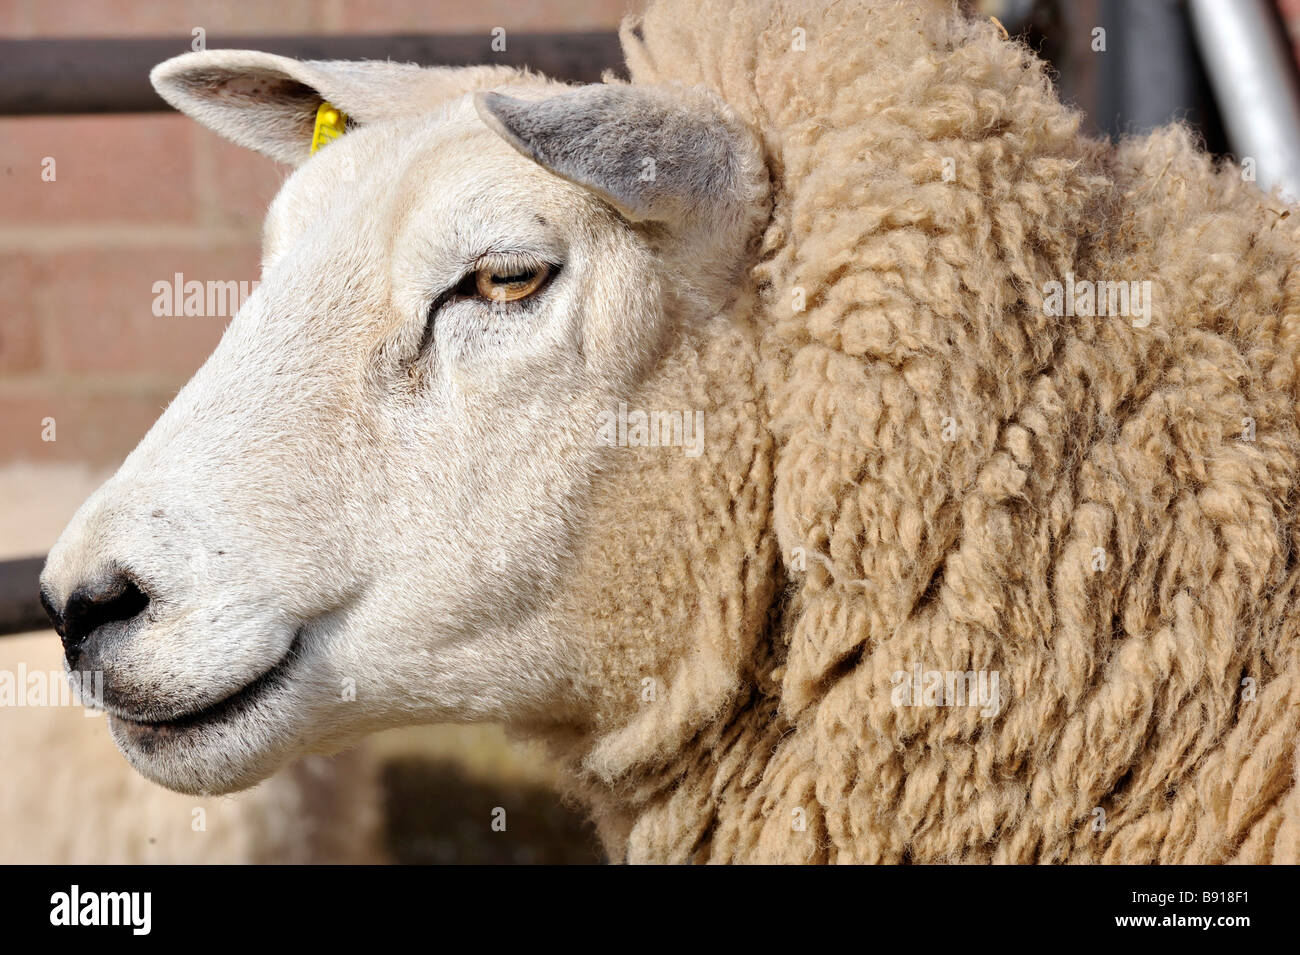 Close up of a Texel ewes head  Stock Photo